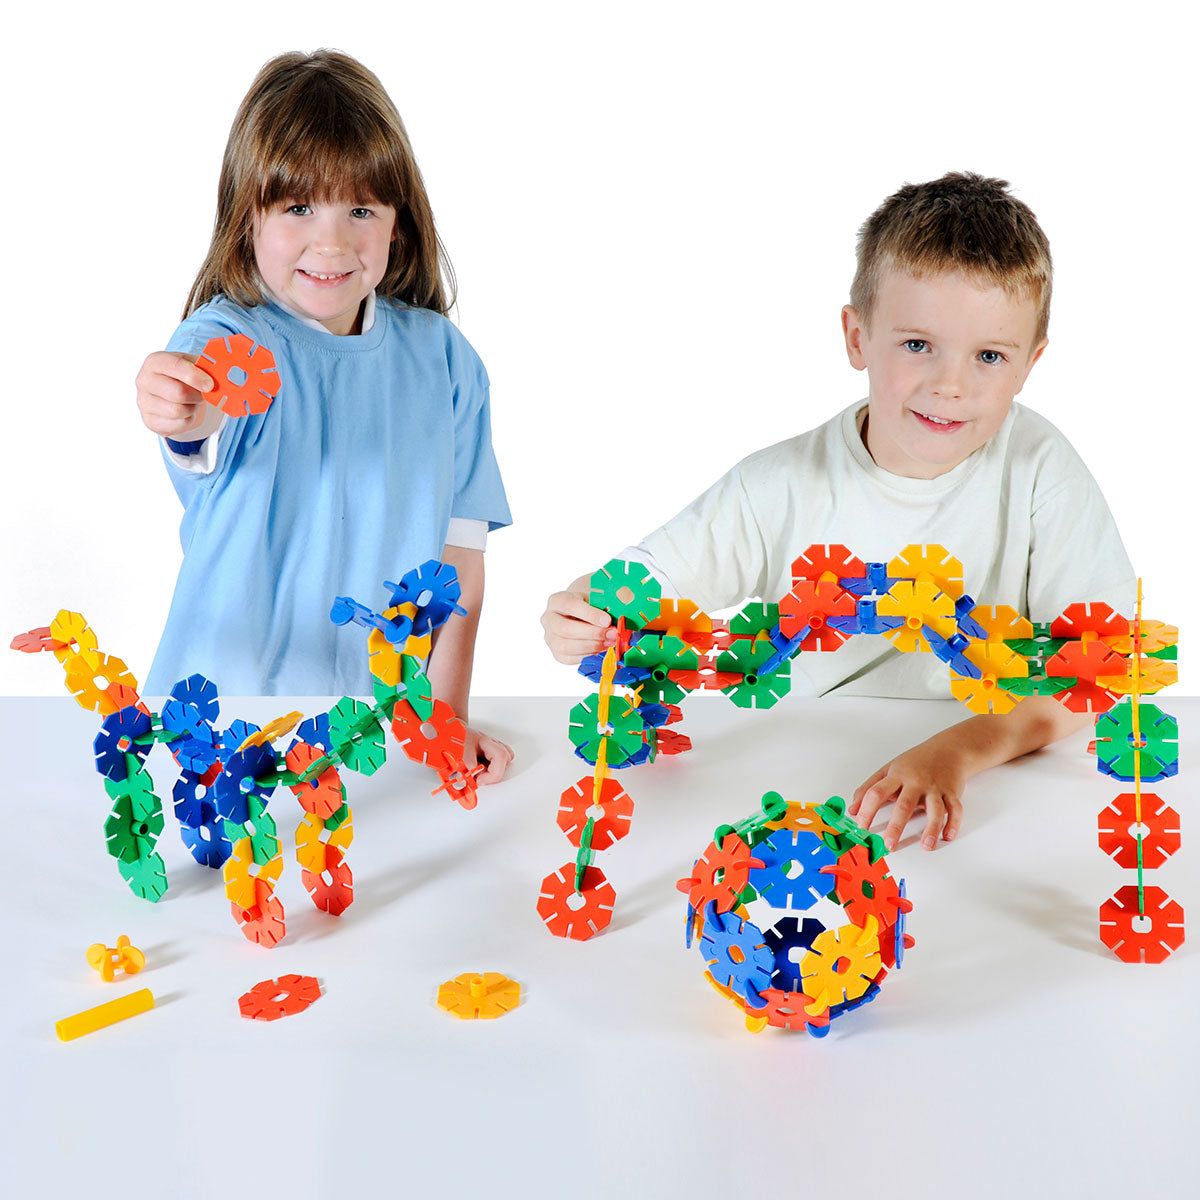 Octoplay Play Pack, The Octoplay Play Pack contains 144 assorted shapes and struts. 6 different components which slot and slide together in a variety of ways.By joining together simple structures and patterns, children will become absorbed very easily into the endless possibilities and will work together whilst having fun. The eight-sided pieces and struts slot together easily and with the wheels in the Fun Pack & Action Pack, moving models are simple. Provides hours of educational play Safe and easy to use